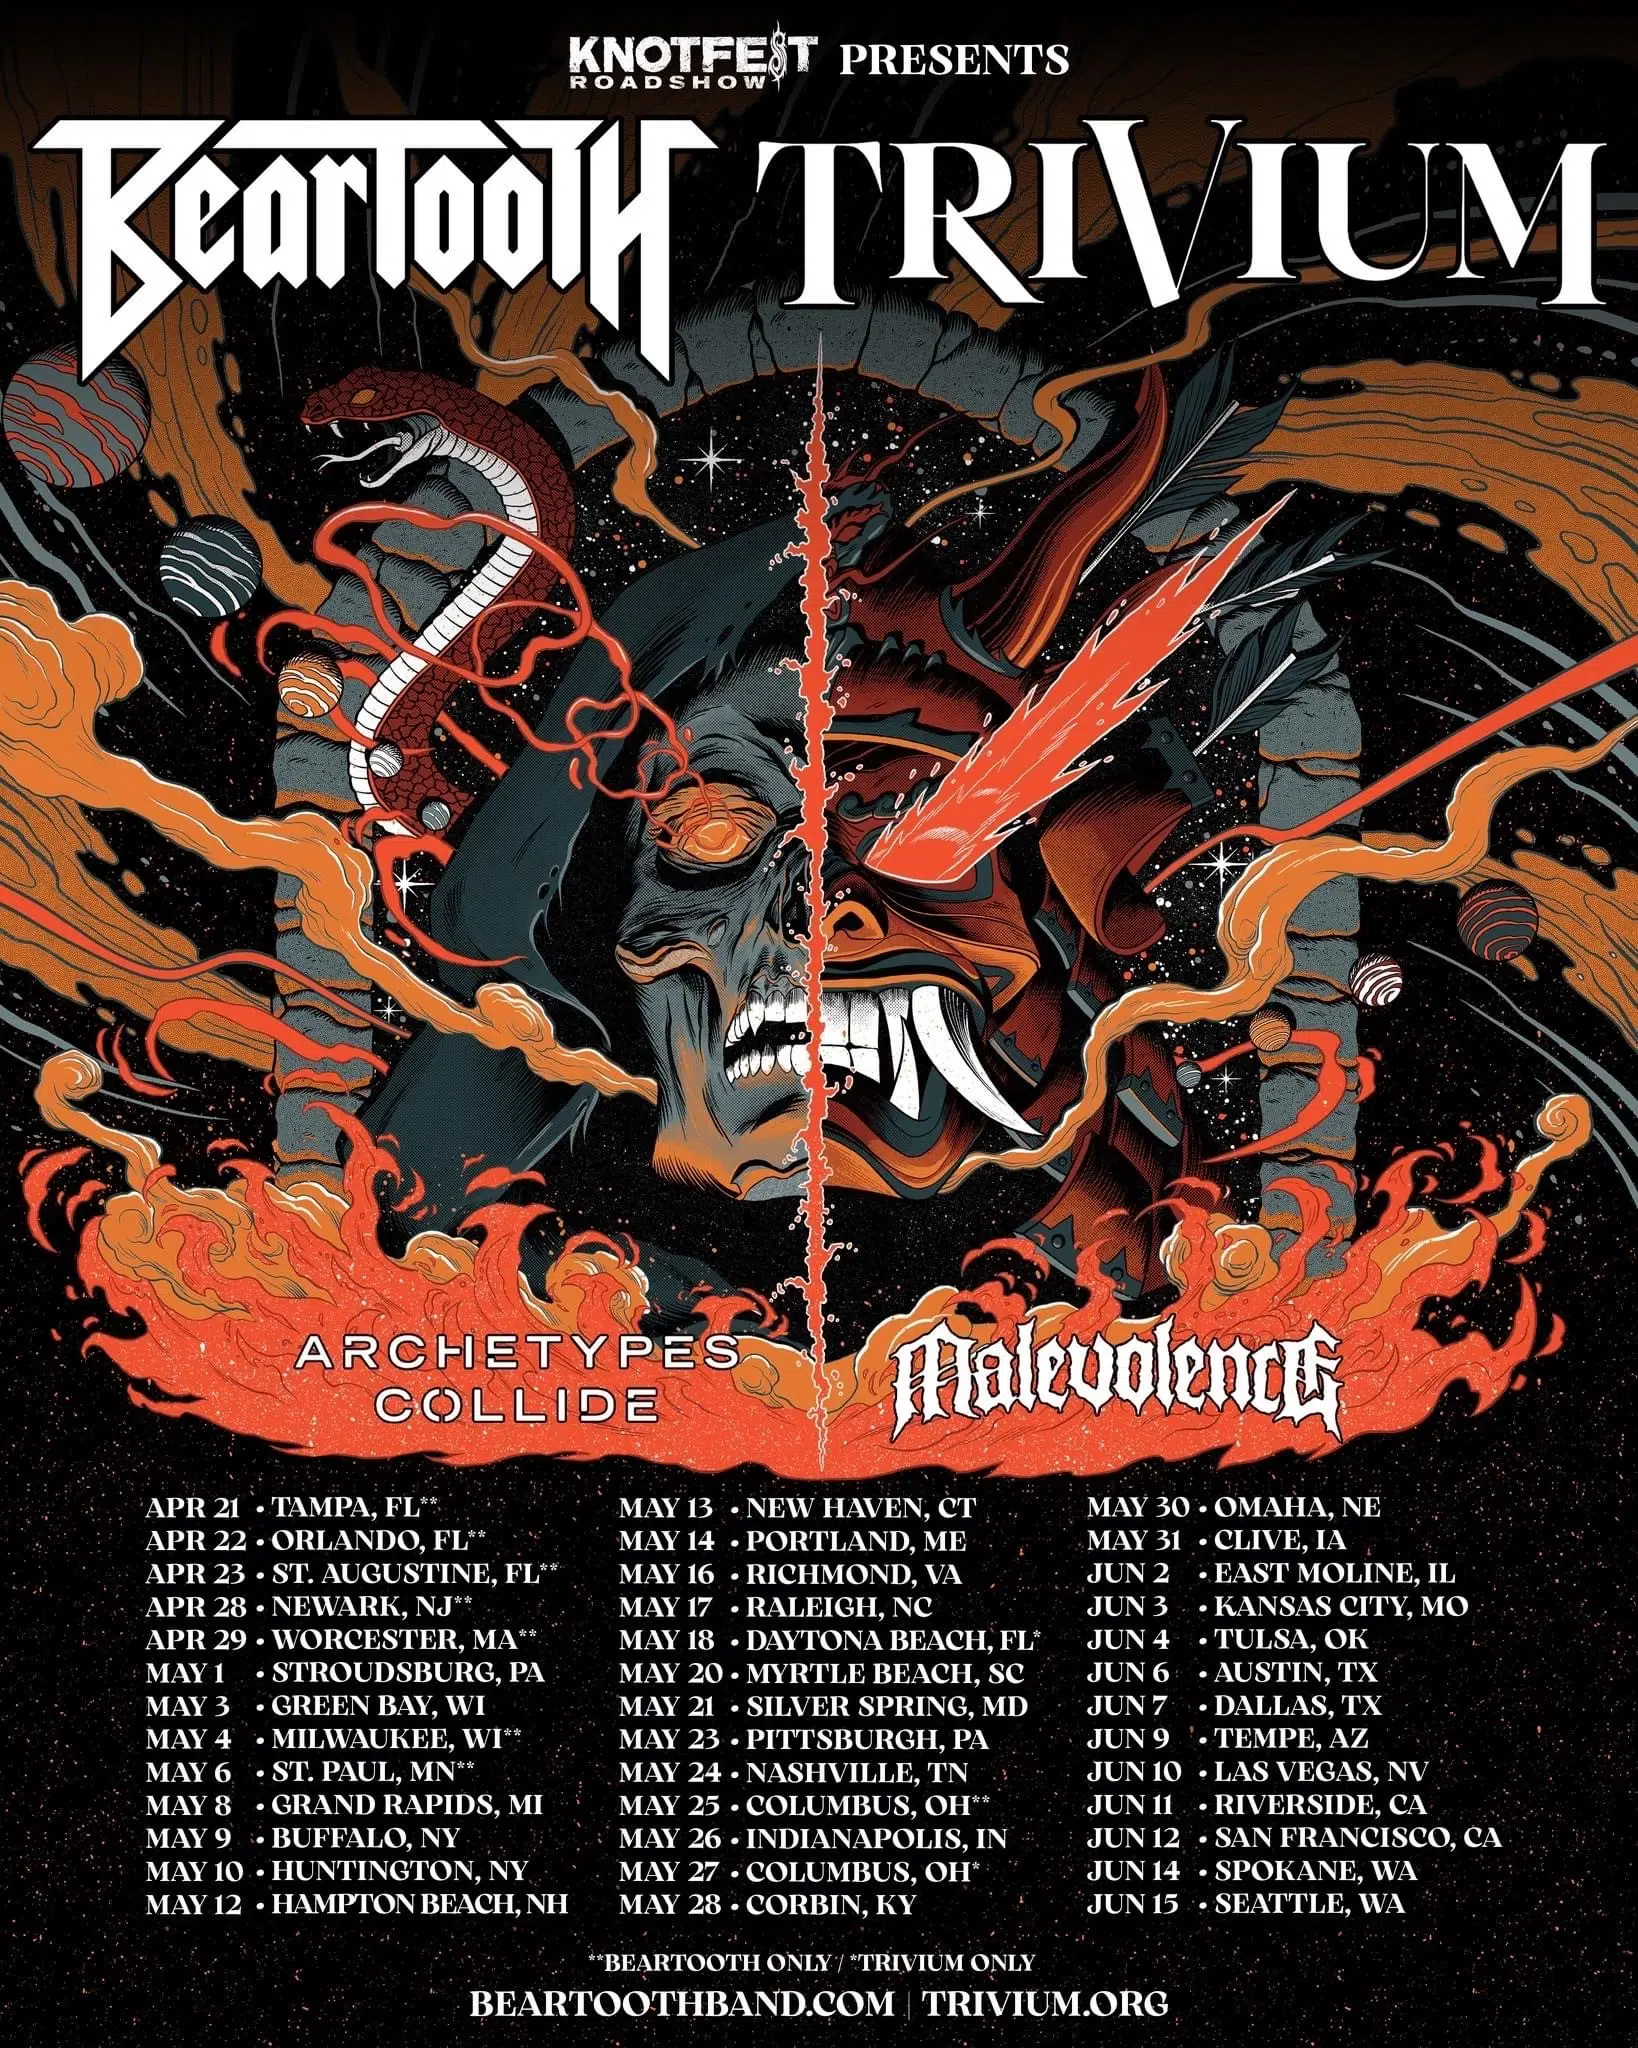 BEARTOOTH AND TRIVIUM TOGETHER?  HELL YEAH!!!!